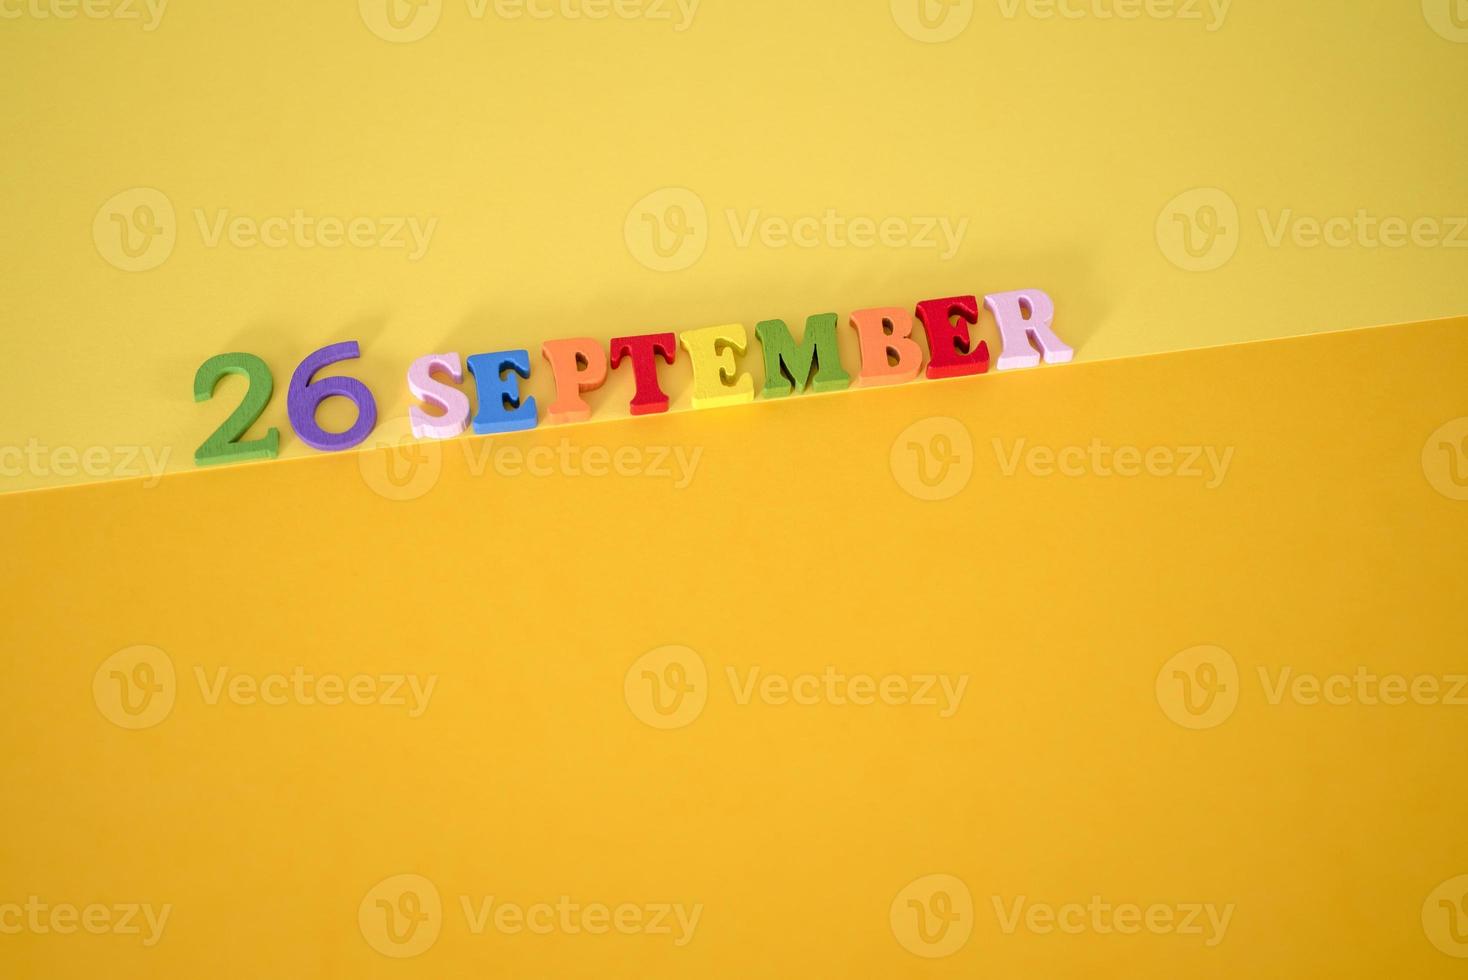 September 23 on a yellow and paper background with wooden letters and numbers in different colors. photo